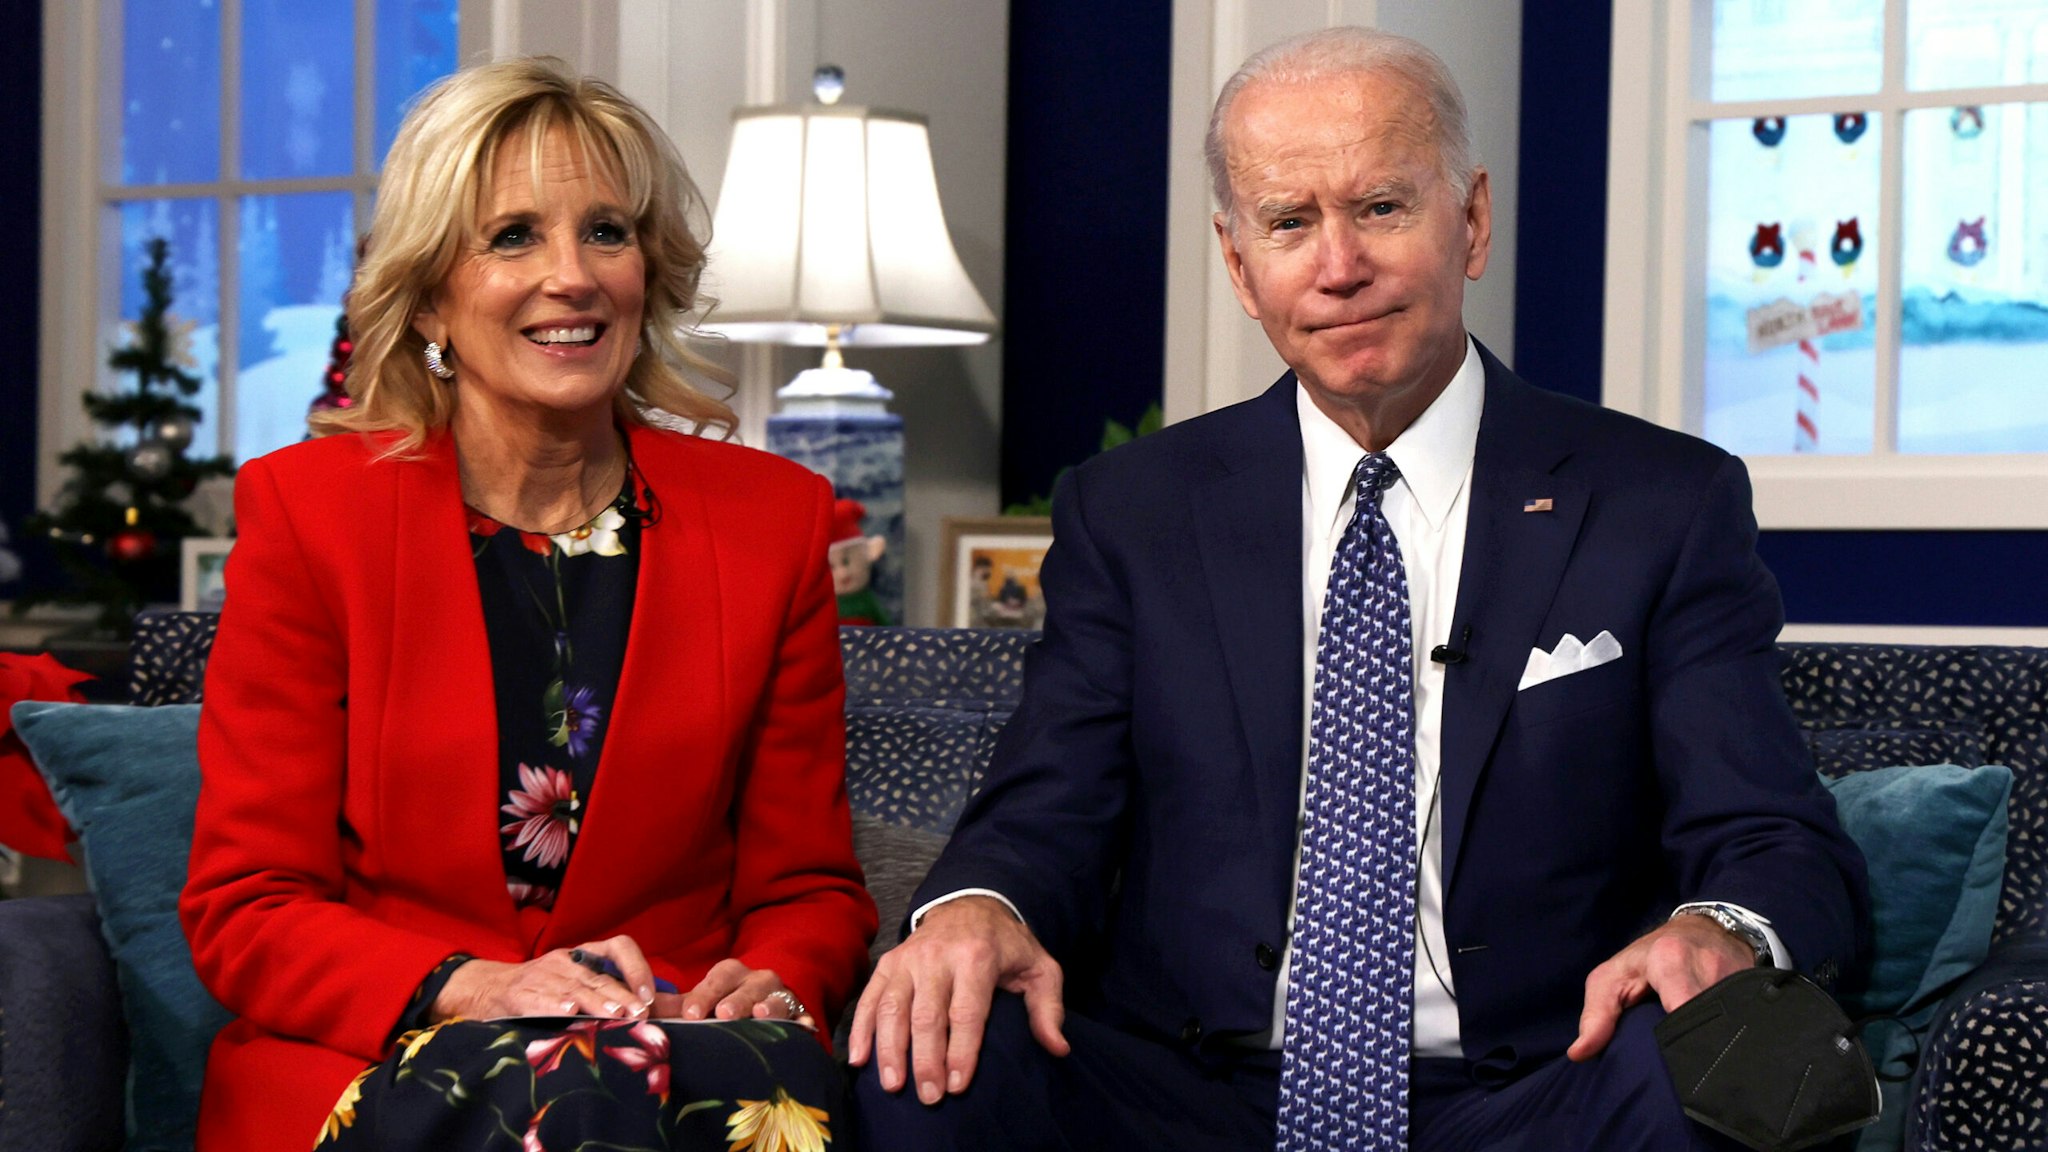 WASHINGTON, DC - DECEMBER 24: U.S. President Joe Biden and first lady Dr. Jill Biden participate in an event to call NORAD and track the path of Santa Claus on Christmas Eve in the South Court Auditorium of the Eisenhower Executive Building on December 24, 2021 in Washington, DC. The president and first lady also called to speak to Americans and thank military families.